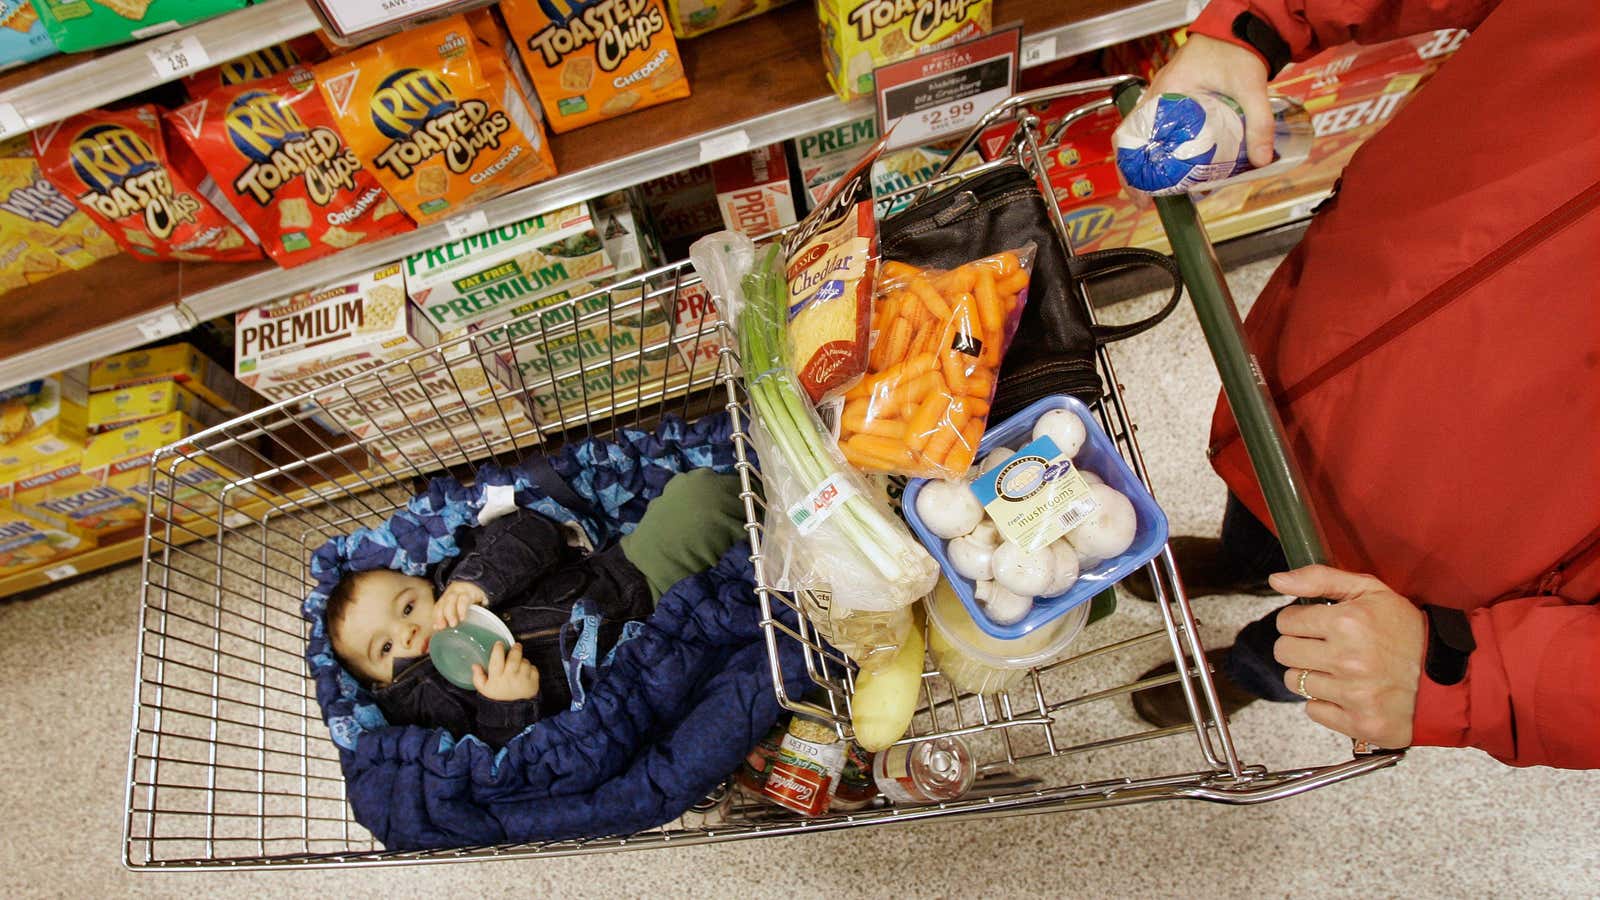 By the time this kid can push his own cart, grocery stores themselves could be obsolete.